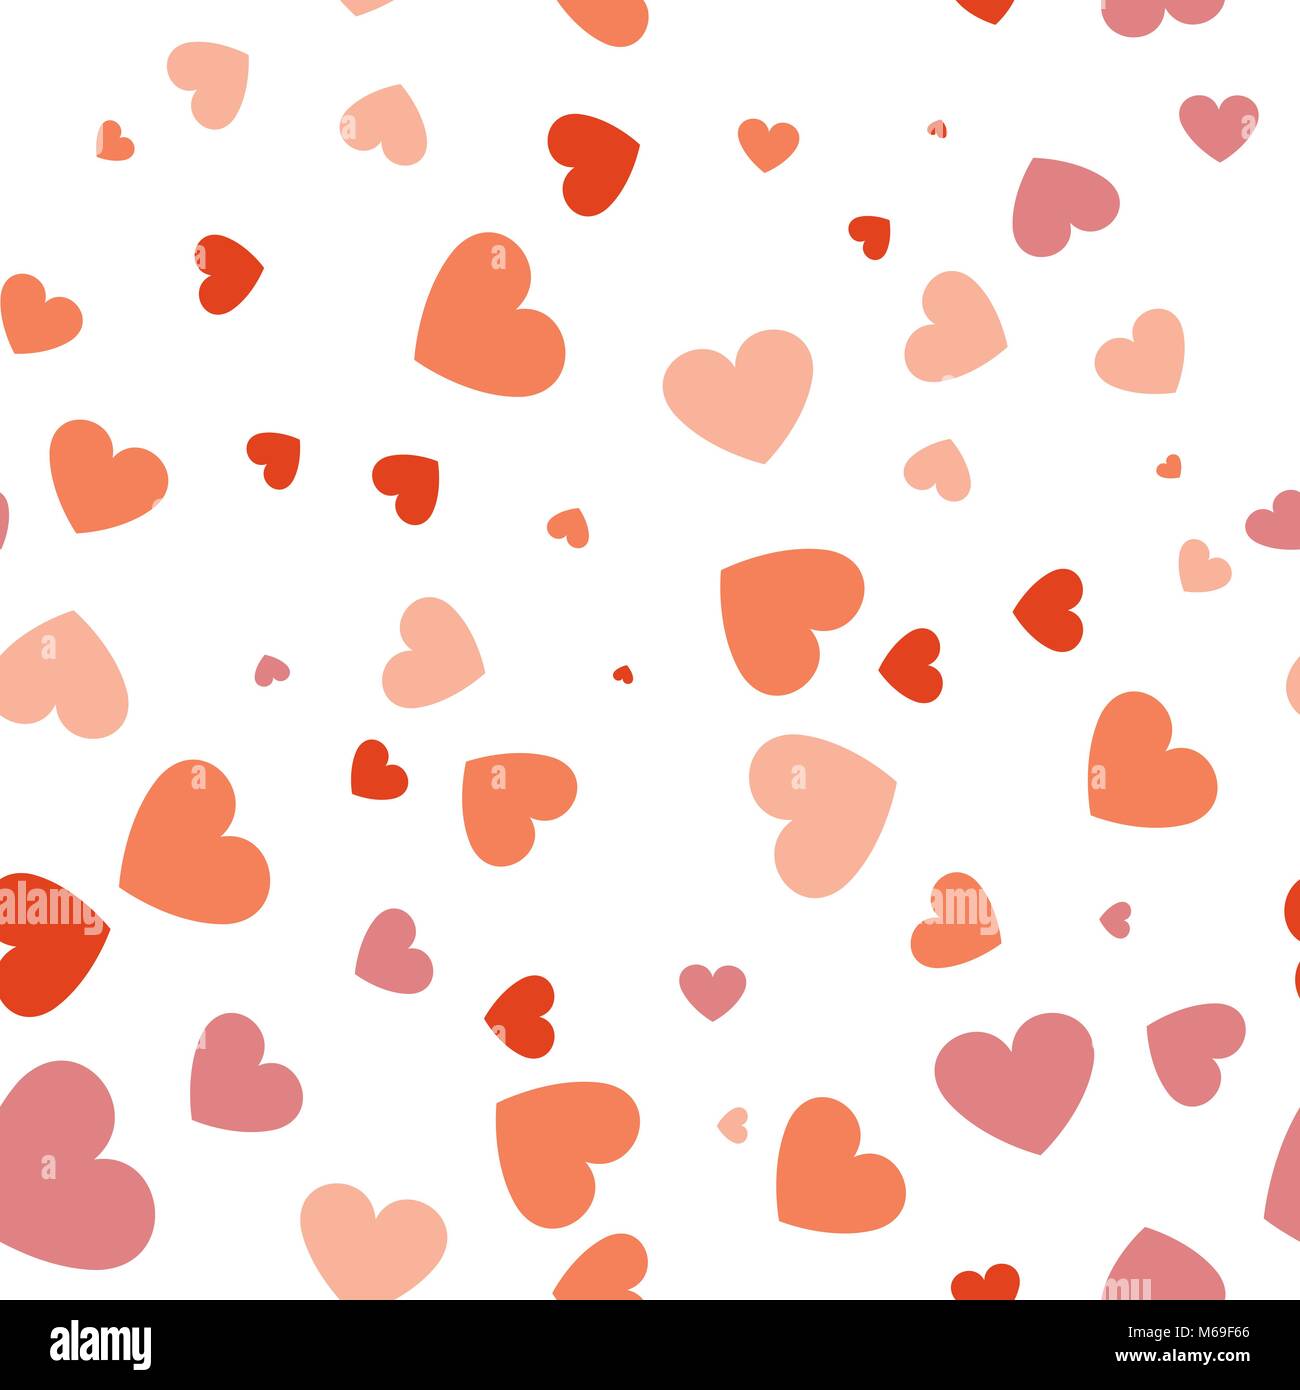 Pink Hearts Confetti Falling On White Stock Vector (Royalty Free